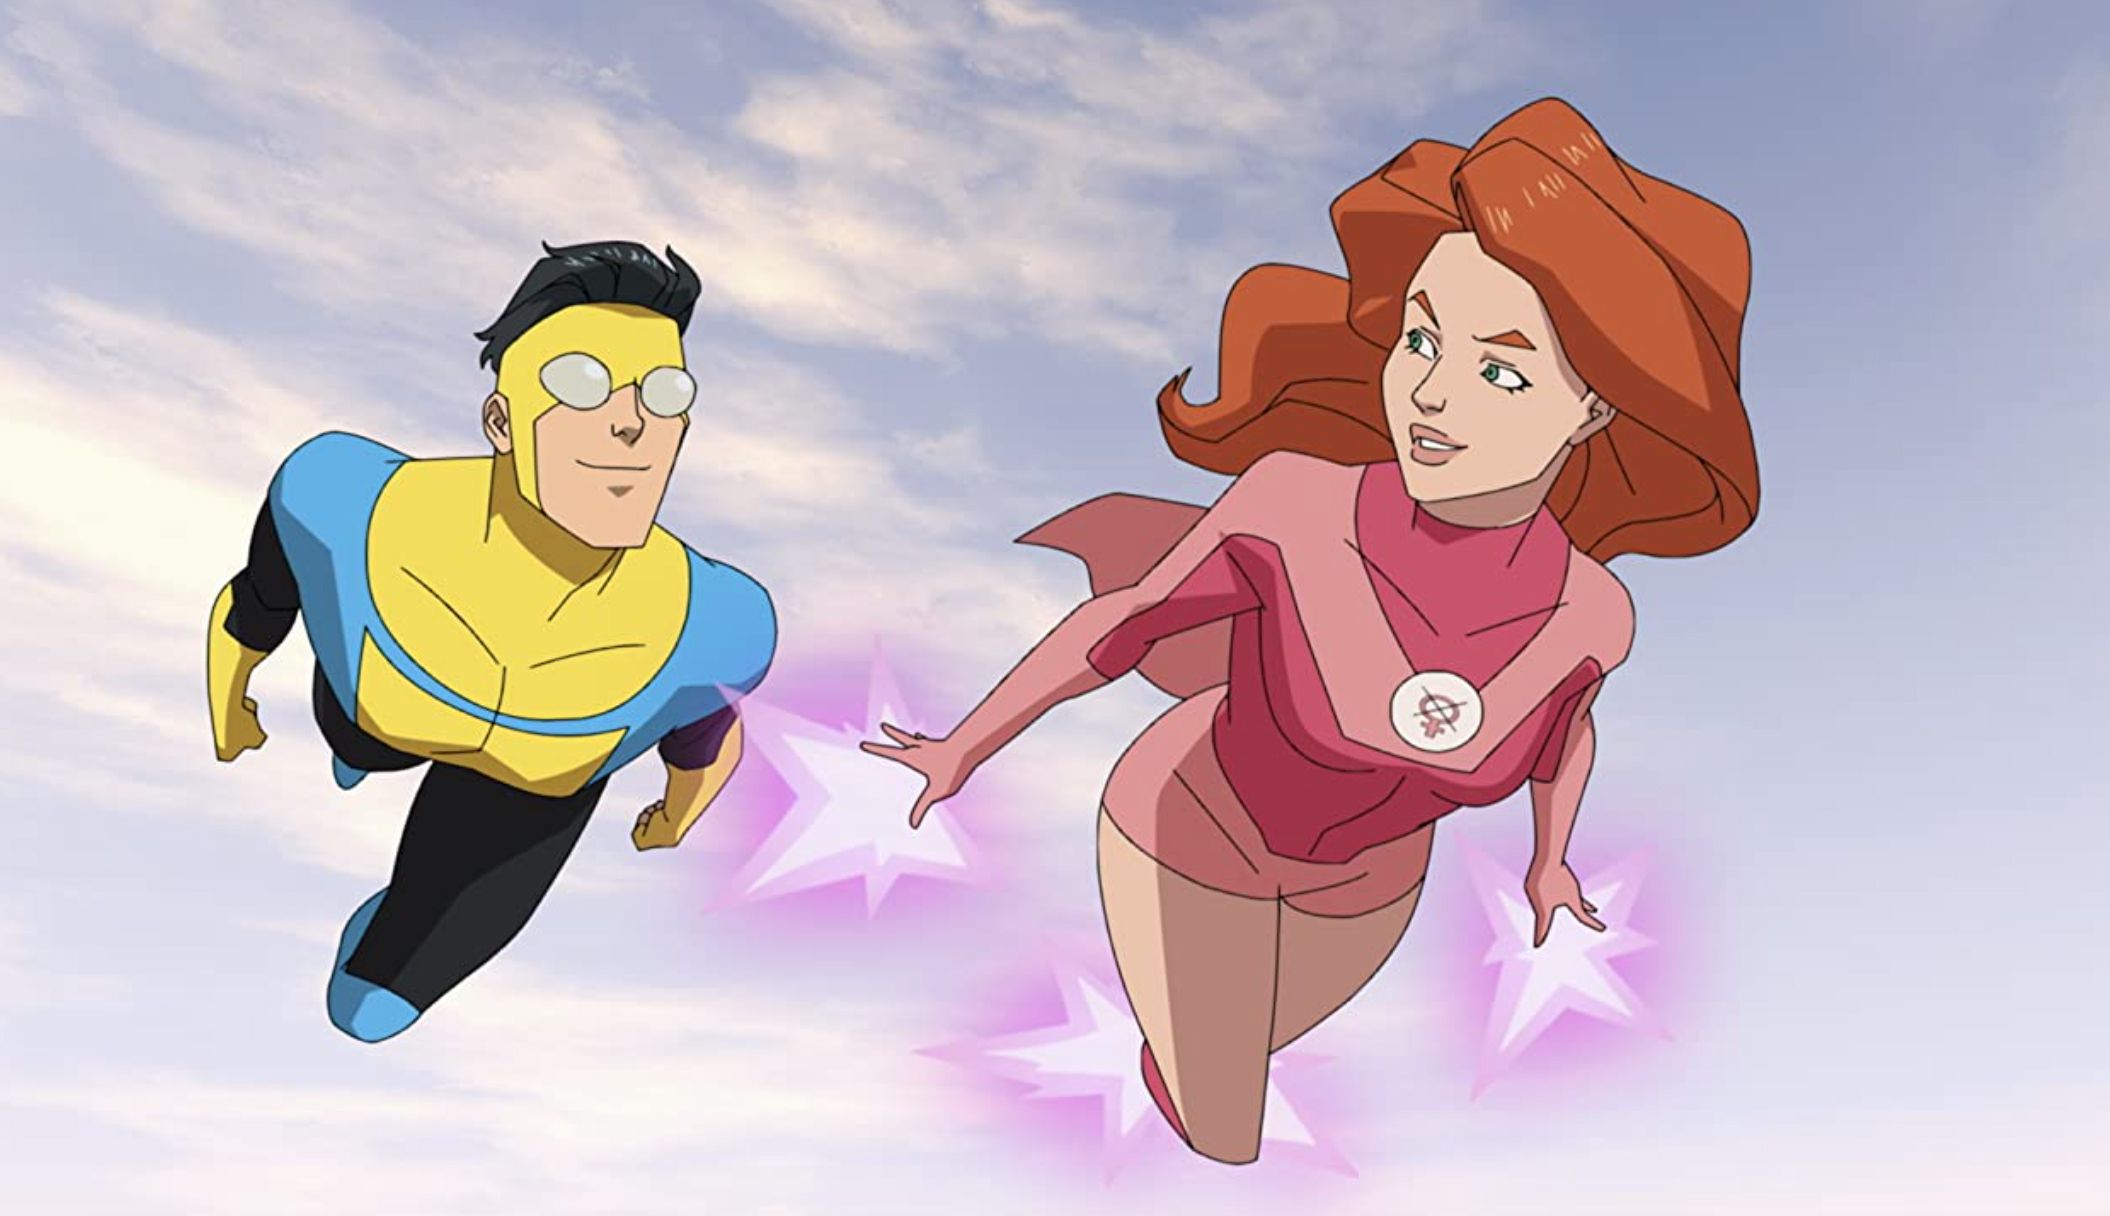 The Real Meaning Of Invincible Season 2, Episode 1's Opening Song Explained